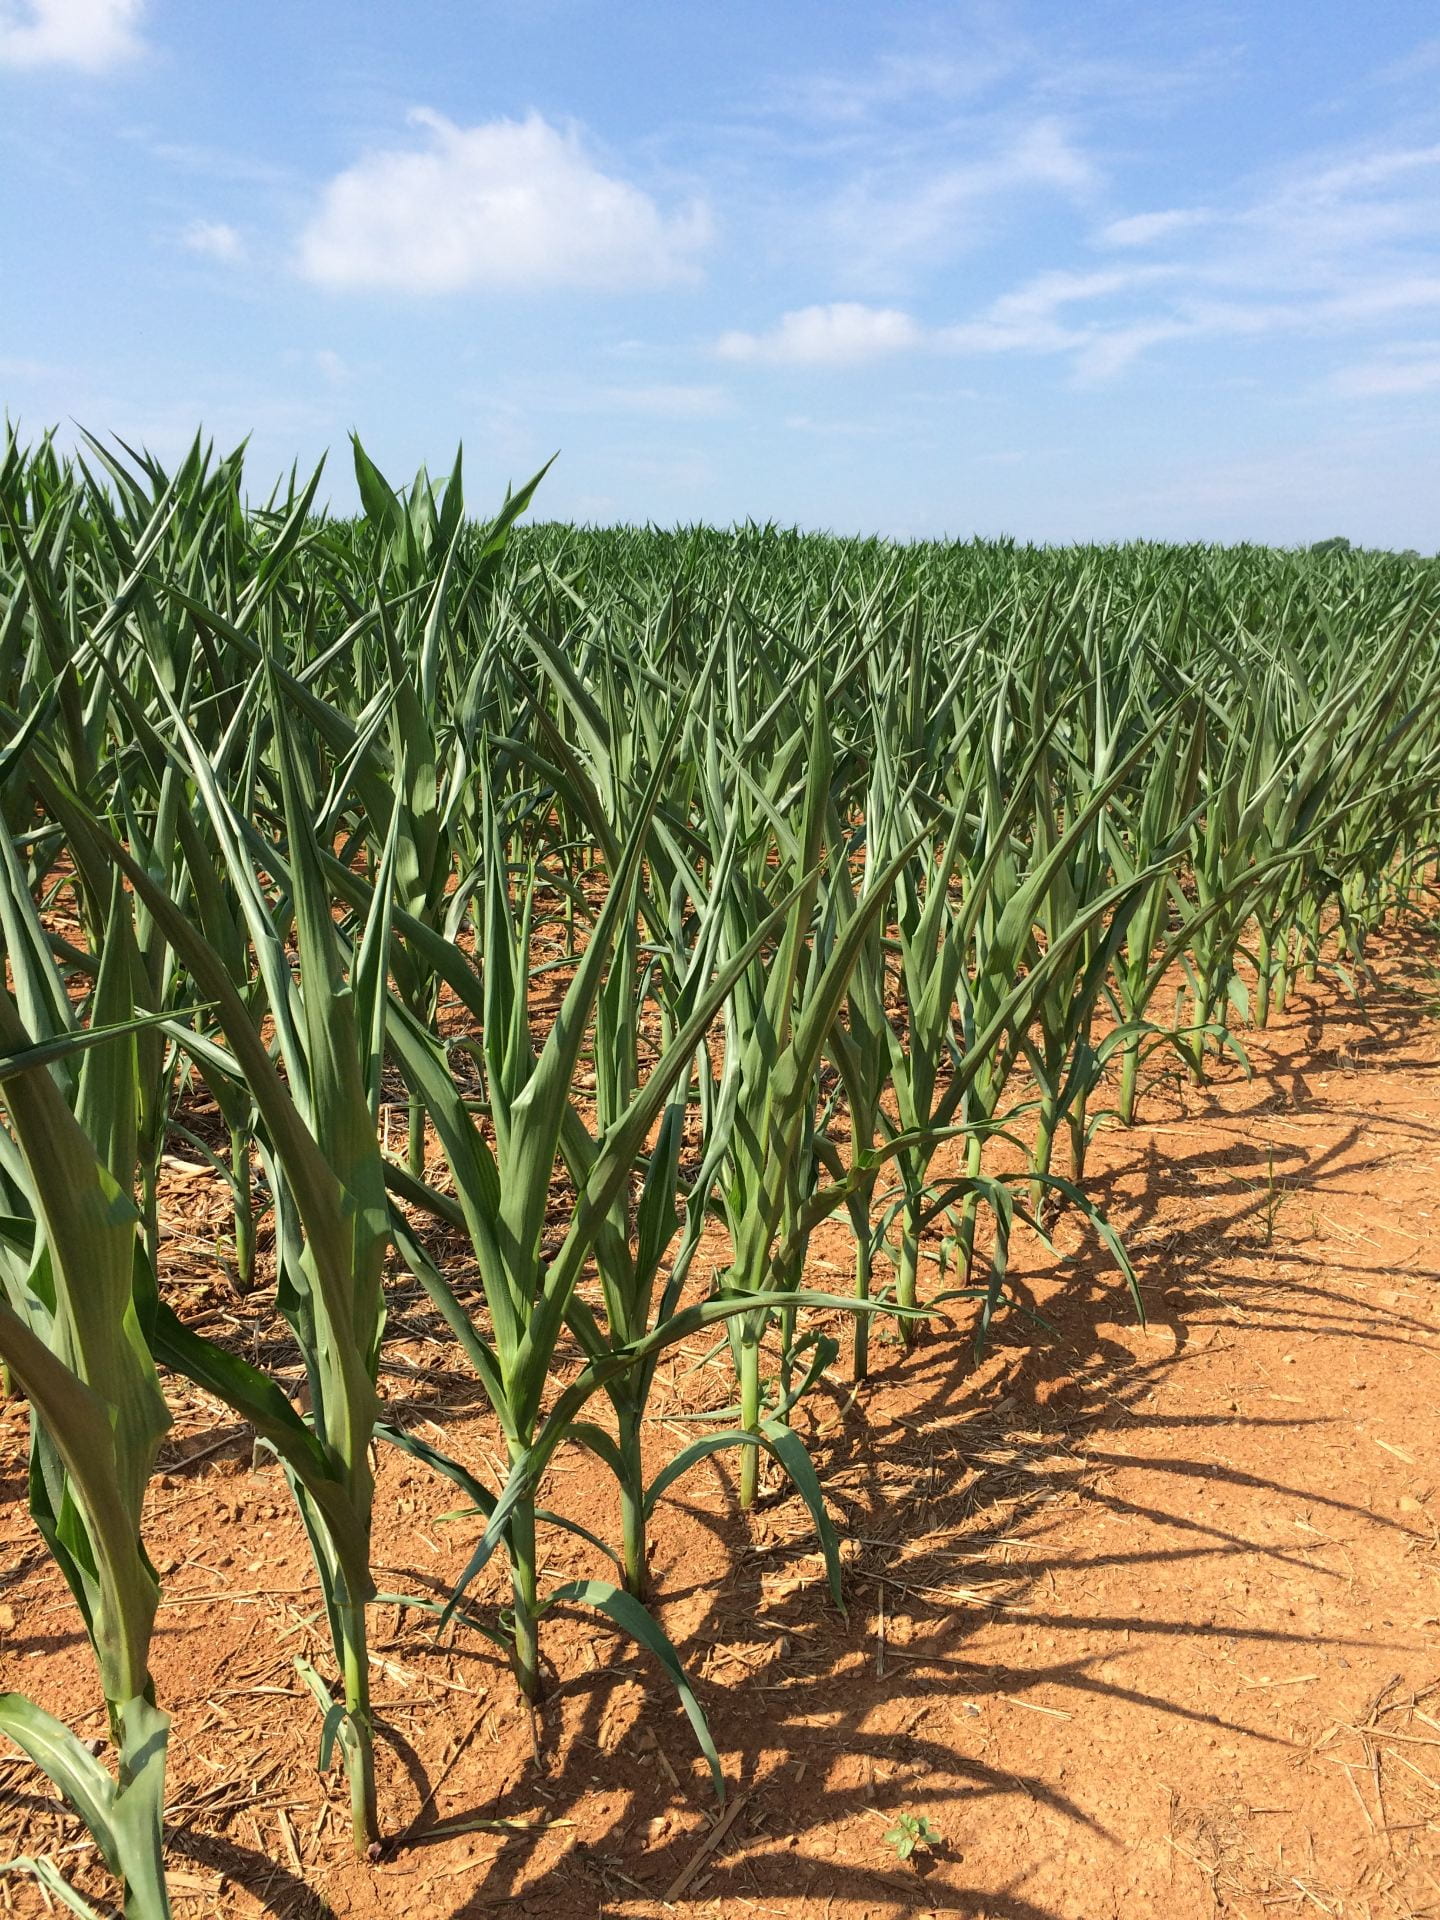 Drought-stressed corn in vegetative growth stage